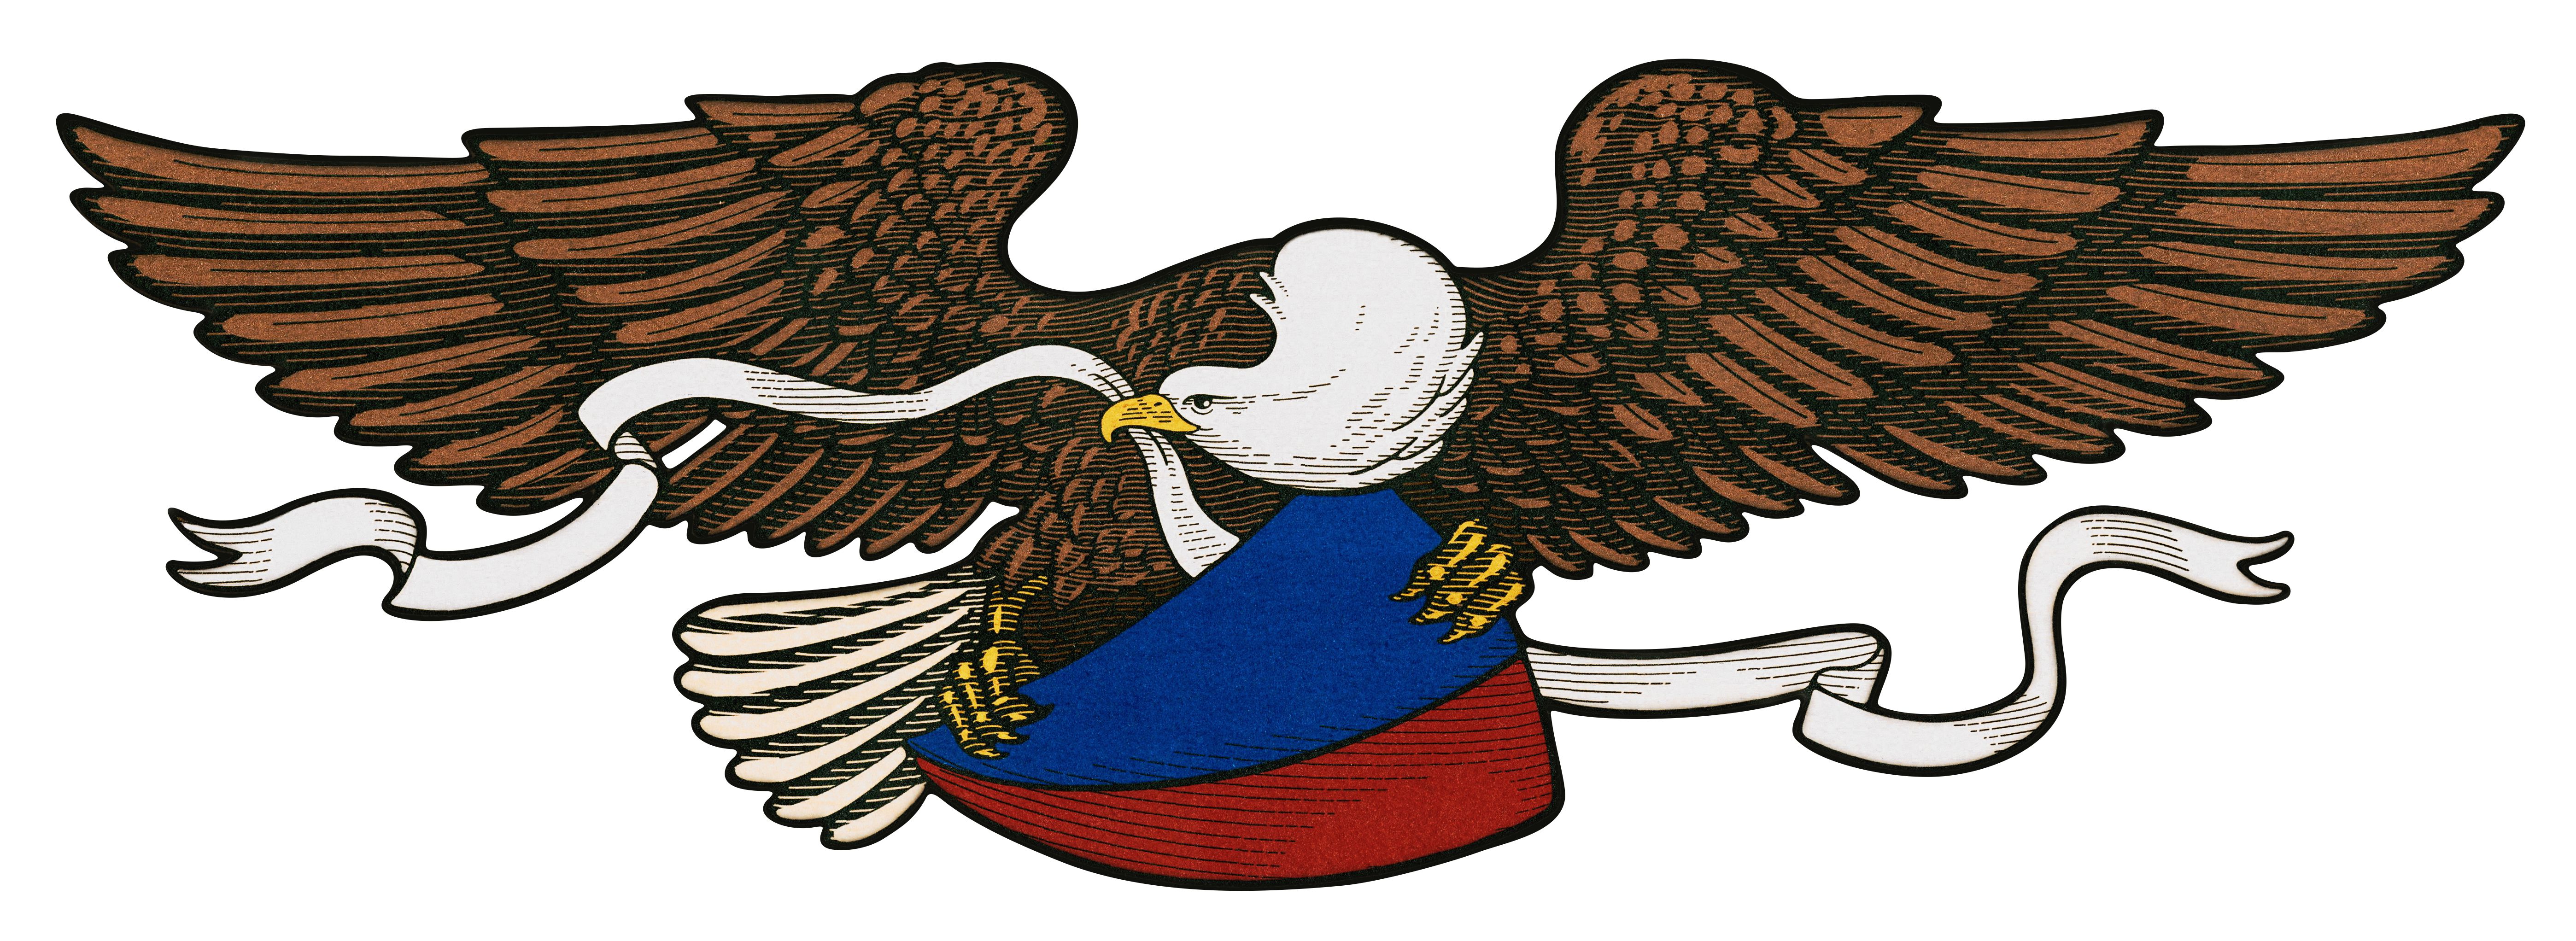 Liberty Eagle - Wooden Jigsaw Puzzle - Liberty Puzzles - Made in the USA